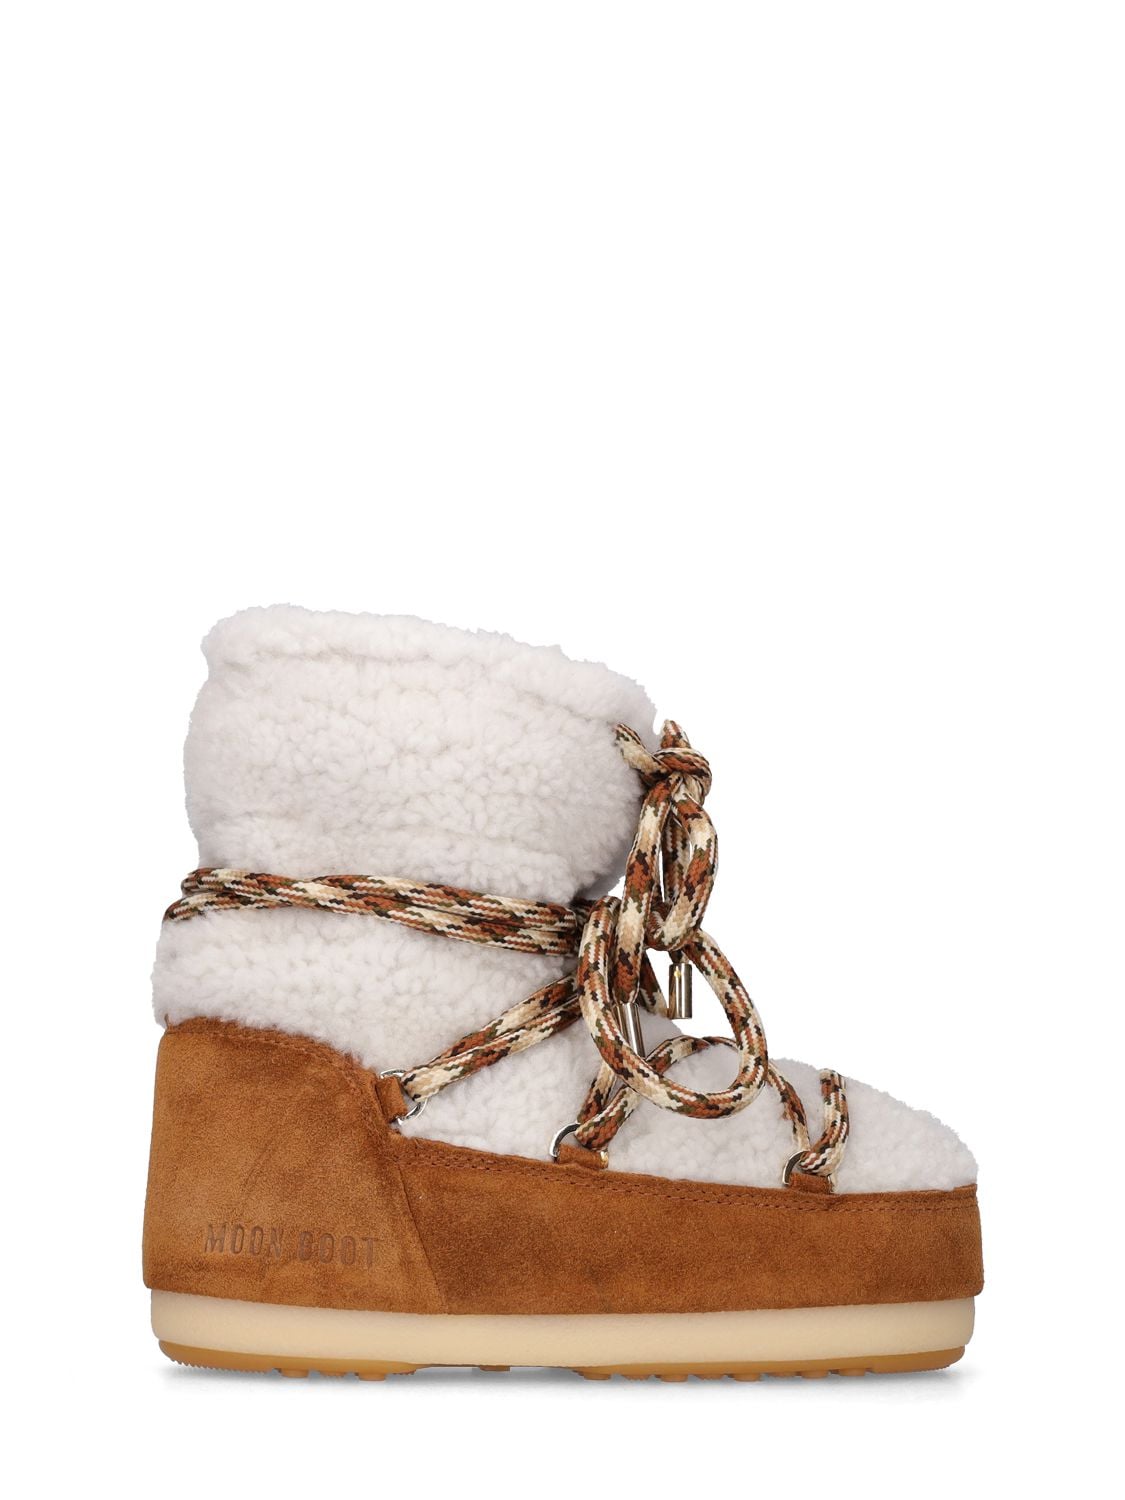 Moon Boot Kids' Shearling & Suede Ankle Snow Boots In White,brown